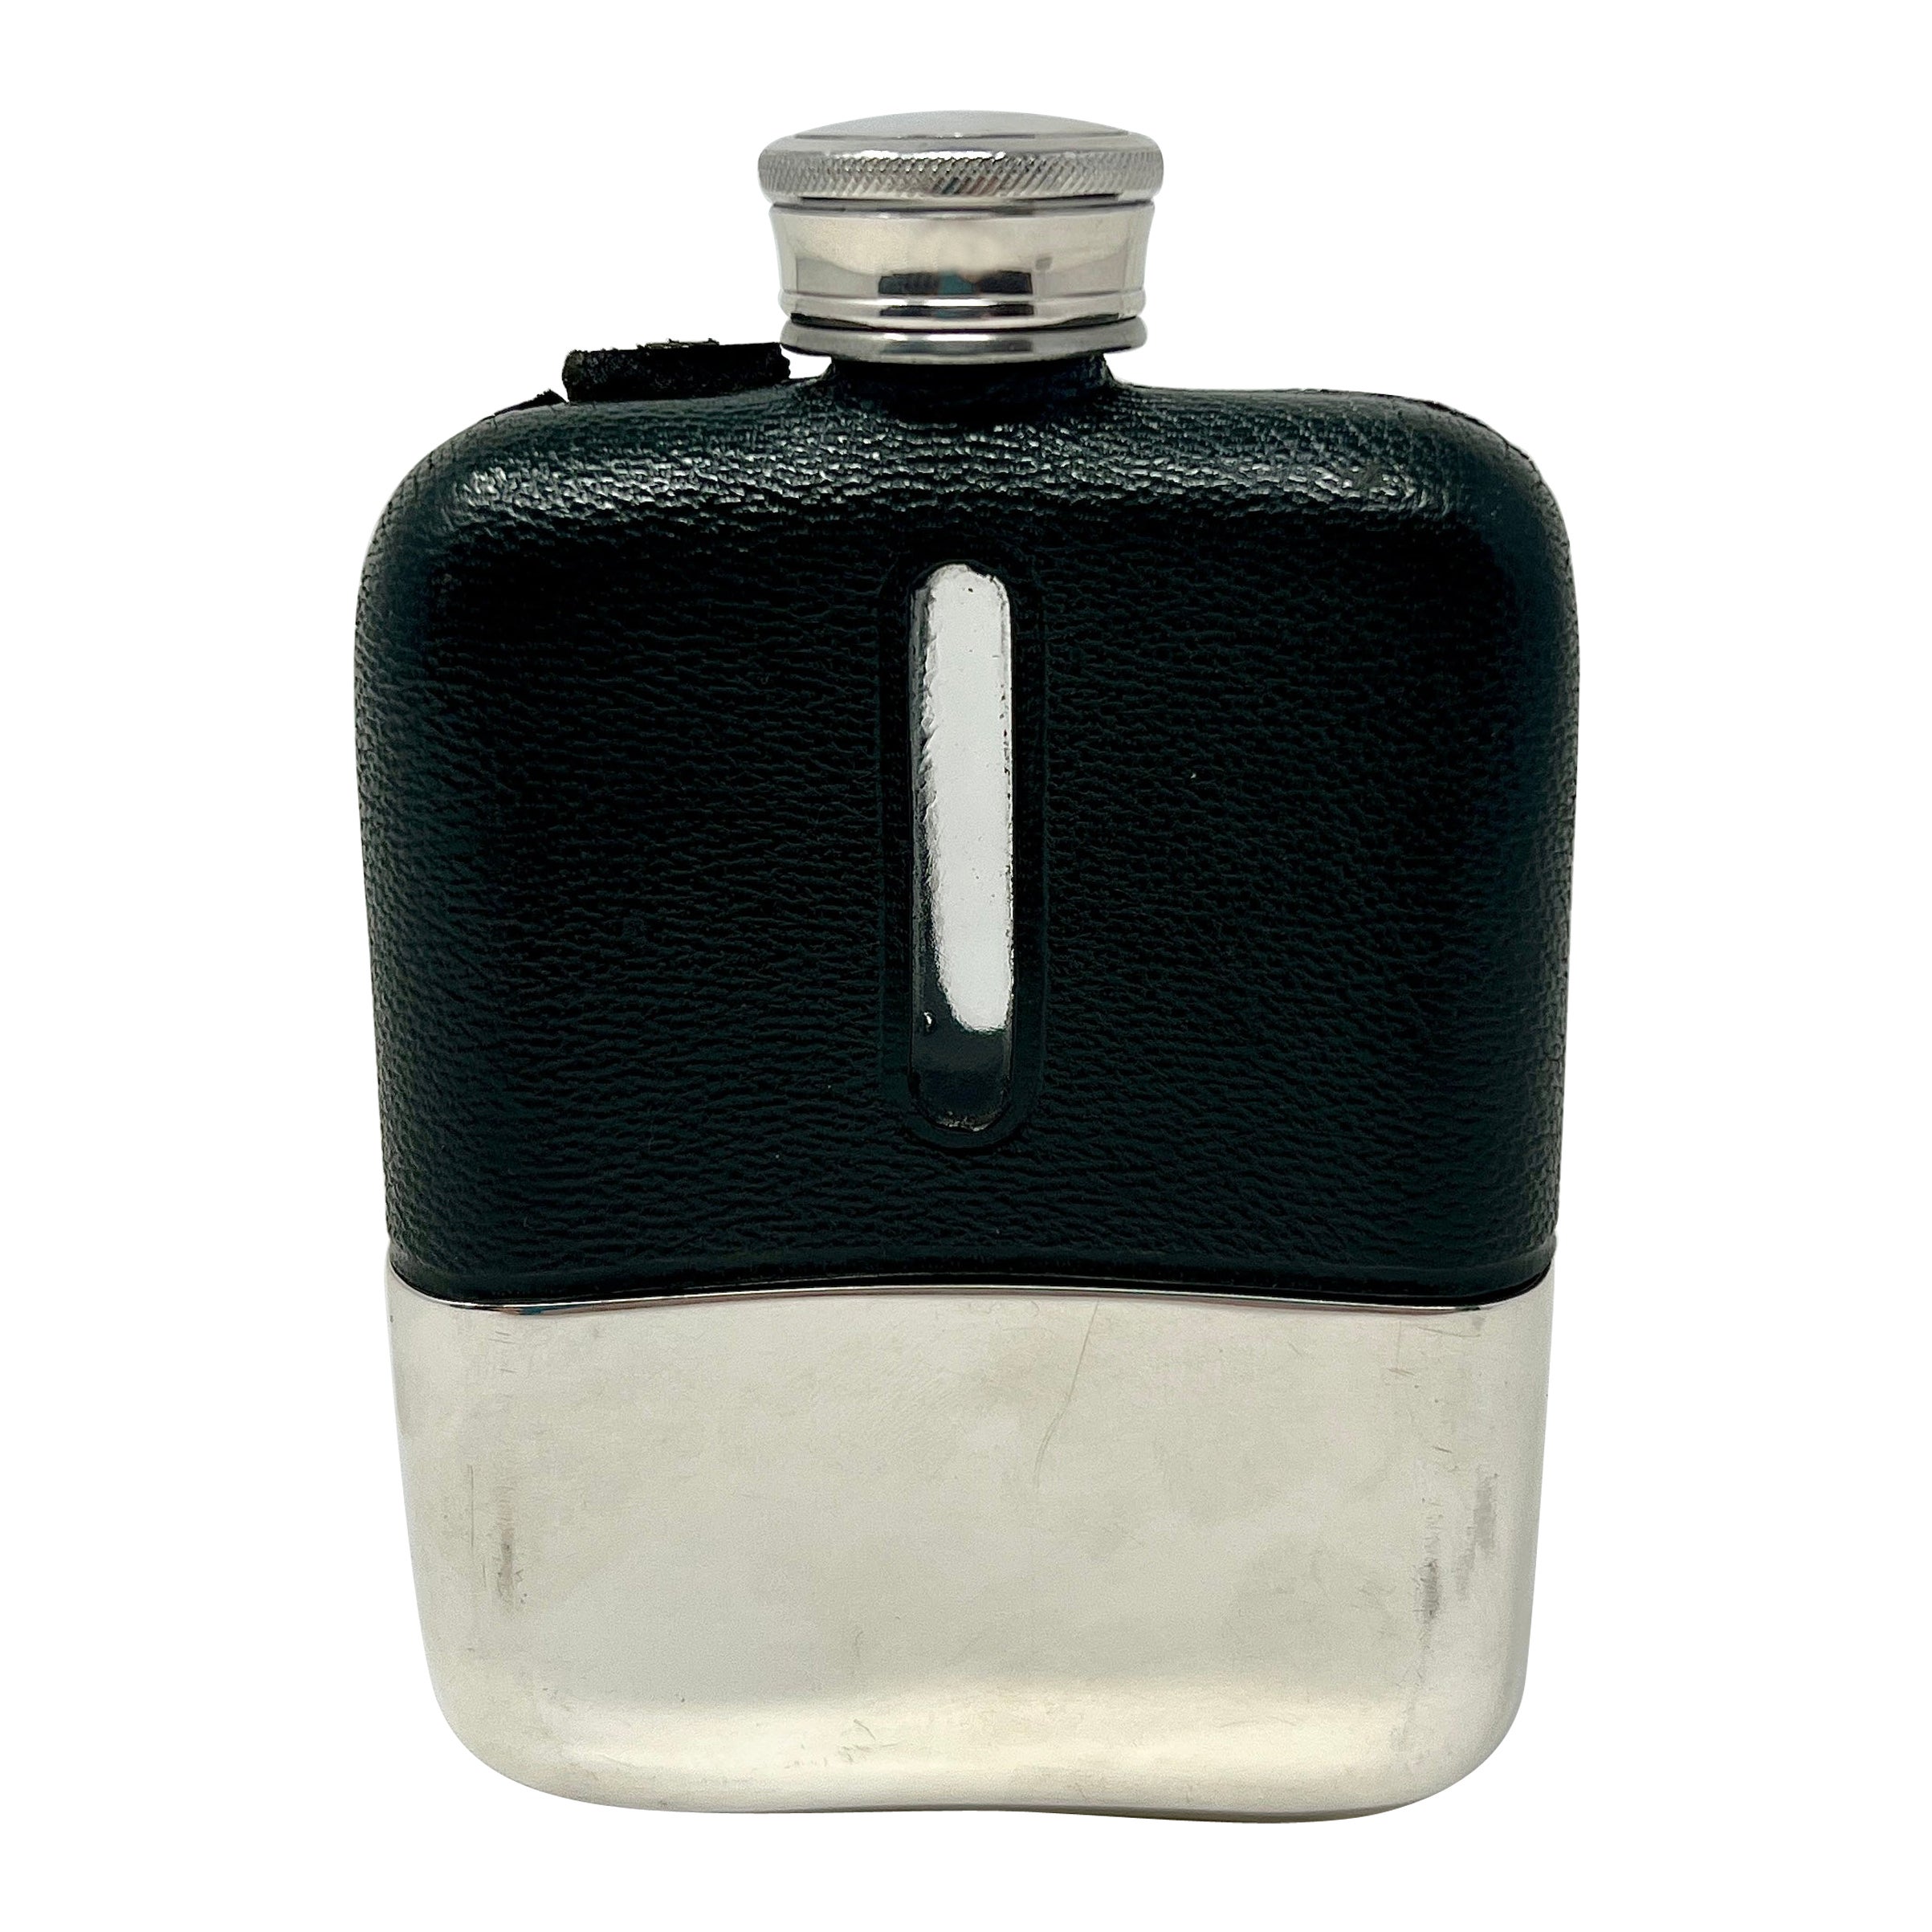 Antique American Art Deco Silver-Plate and Leather Drinking Flask, Circa 1920.